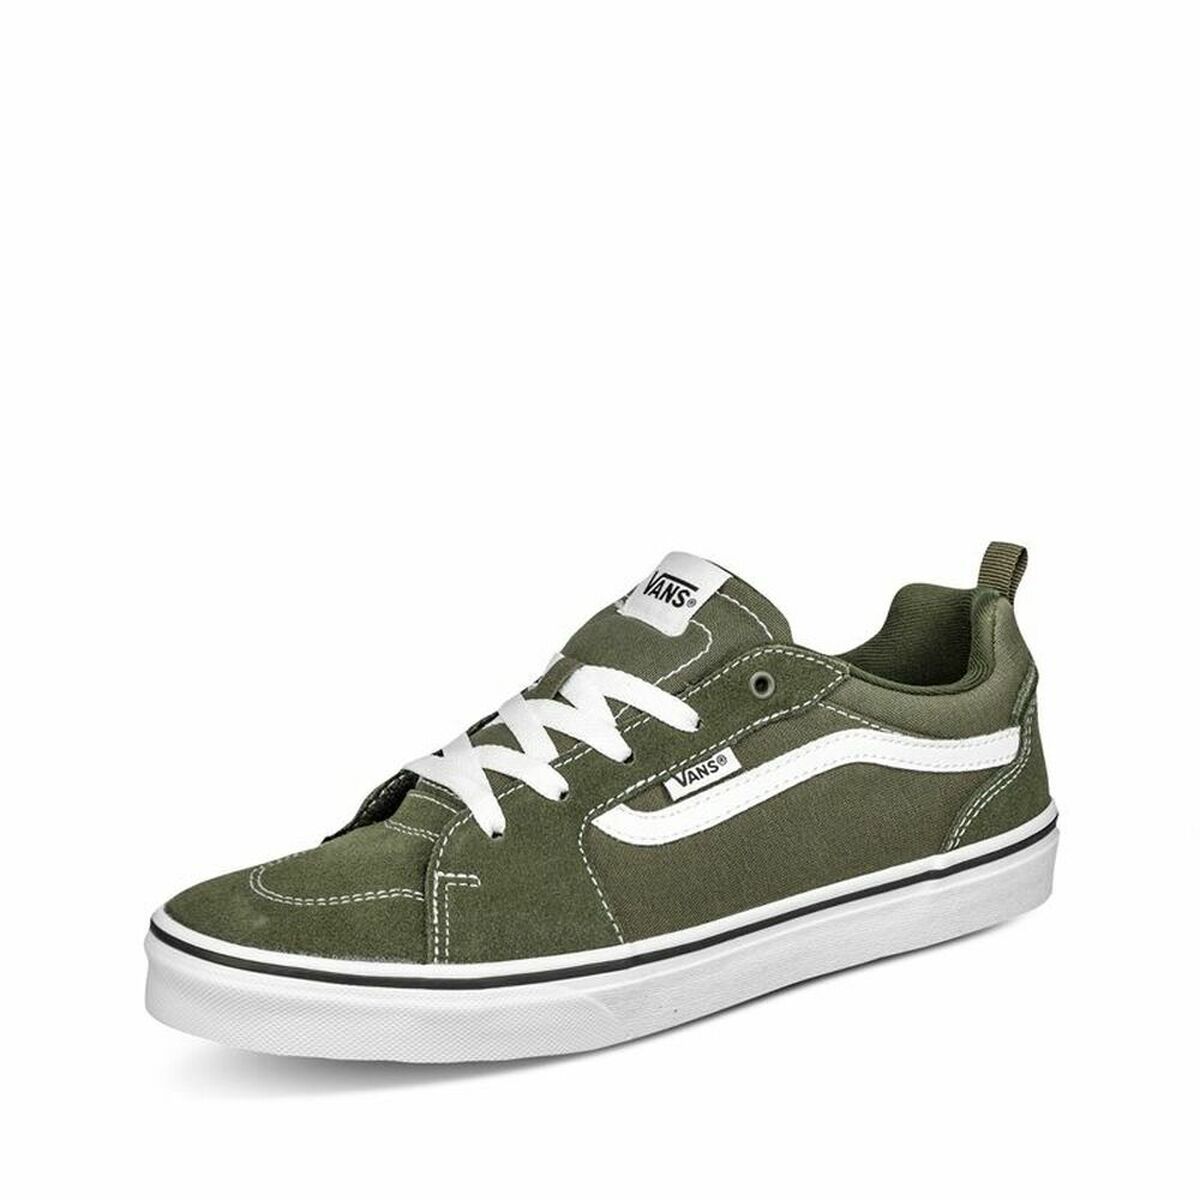 Chaussures casual Vans YT Filmore Olive